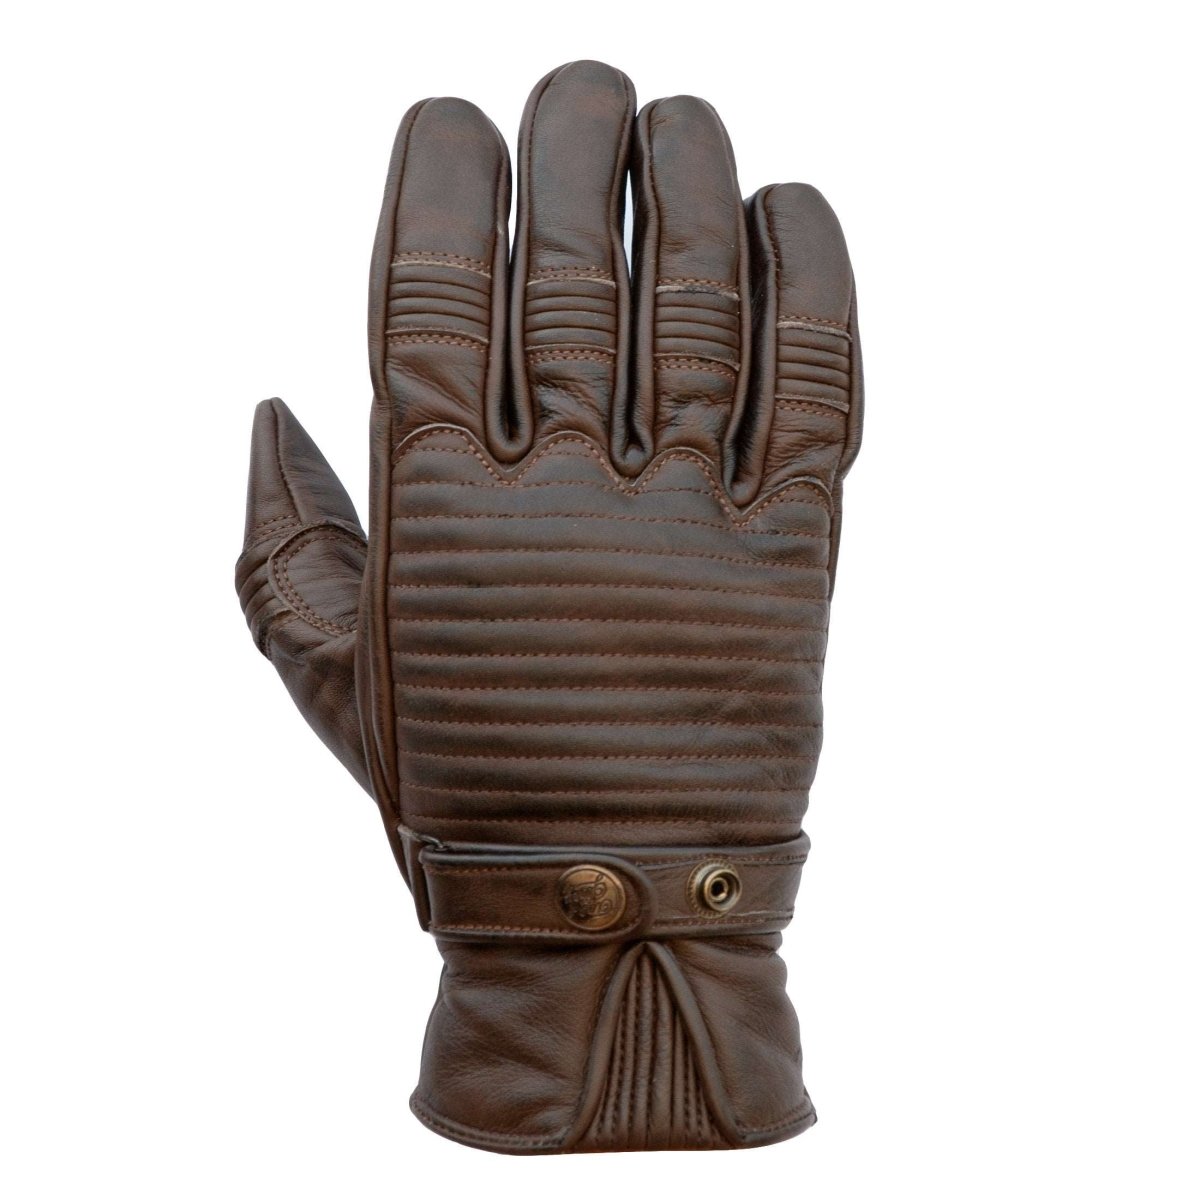 Age of Glory Garage Leather CE Gloves in Brown 